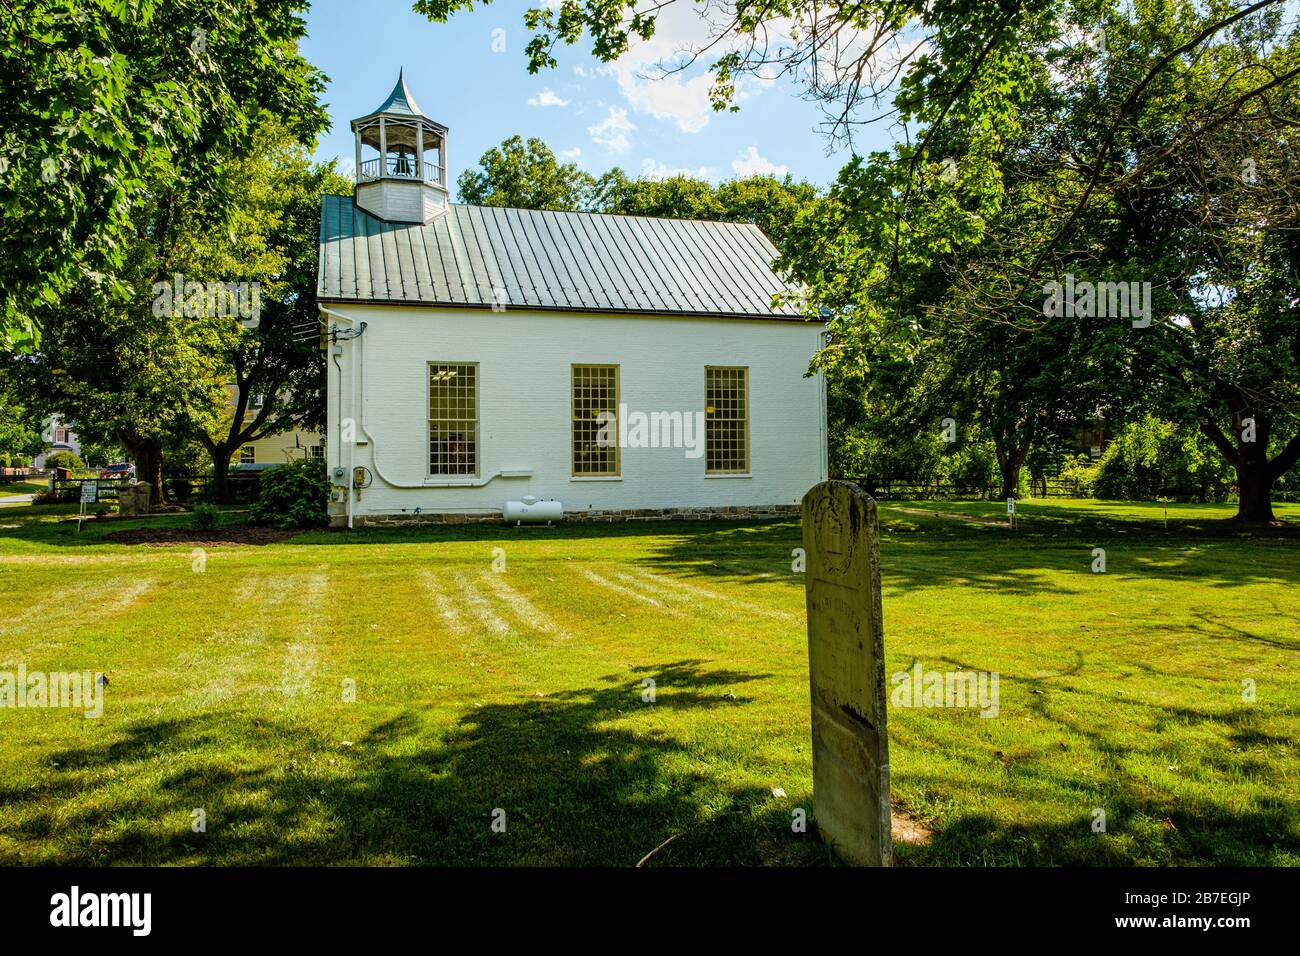 The White Church, 112 East Street, Middleway, West Virginia Stock Photo